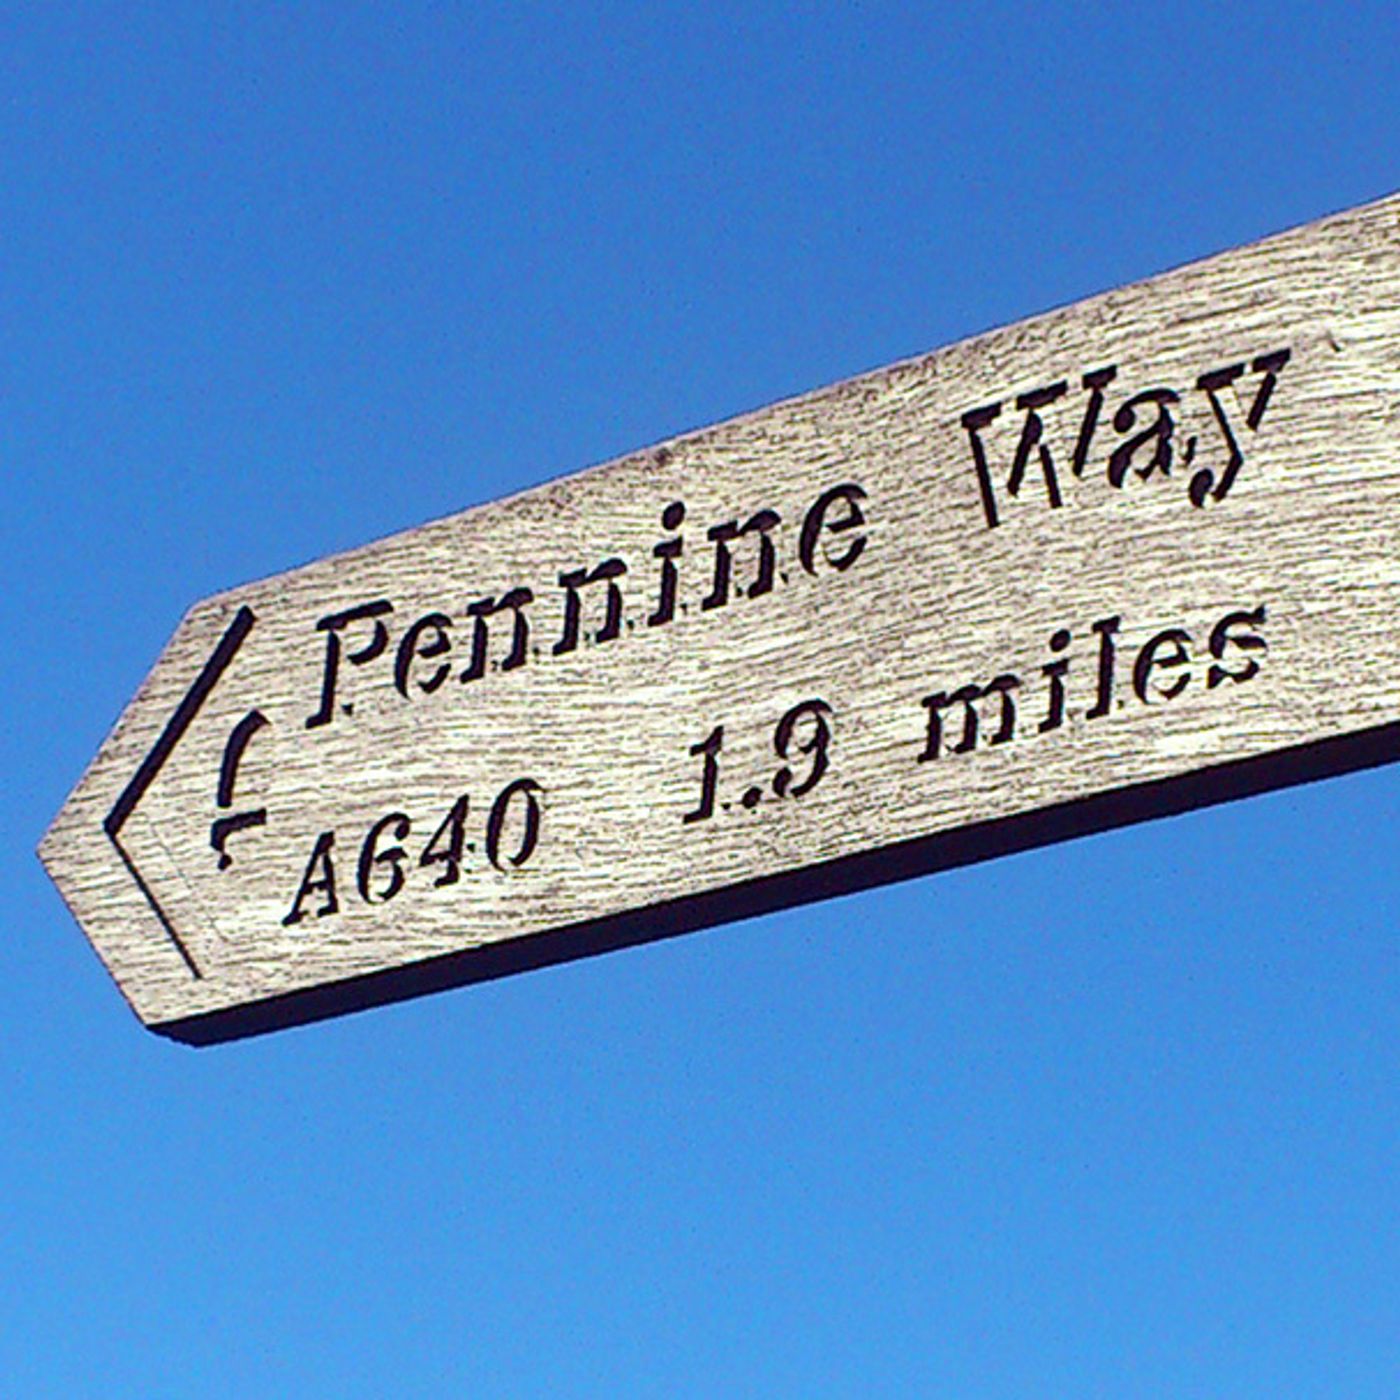 S2 Ep38: The Best of the Walks Around Britain podcast - the Pennine Way